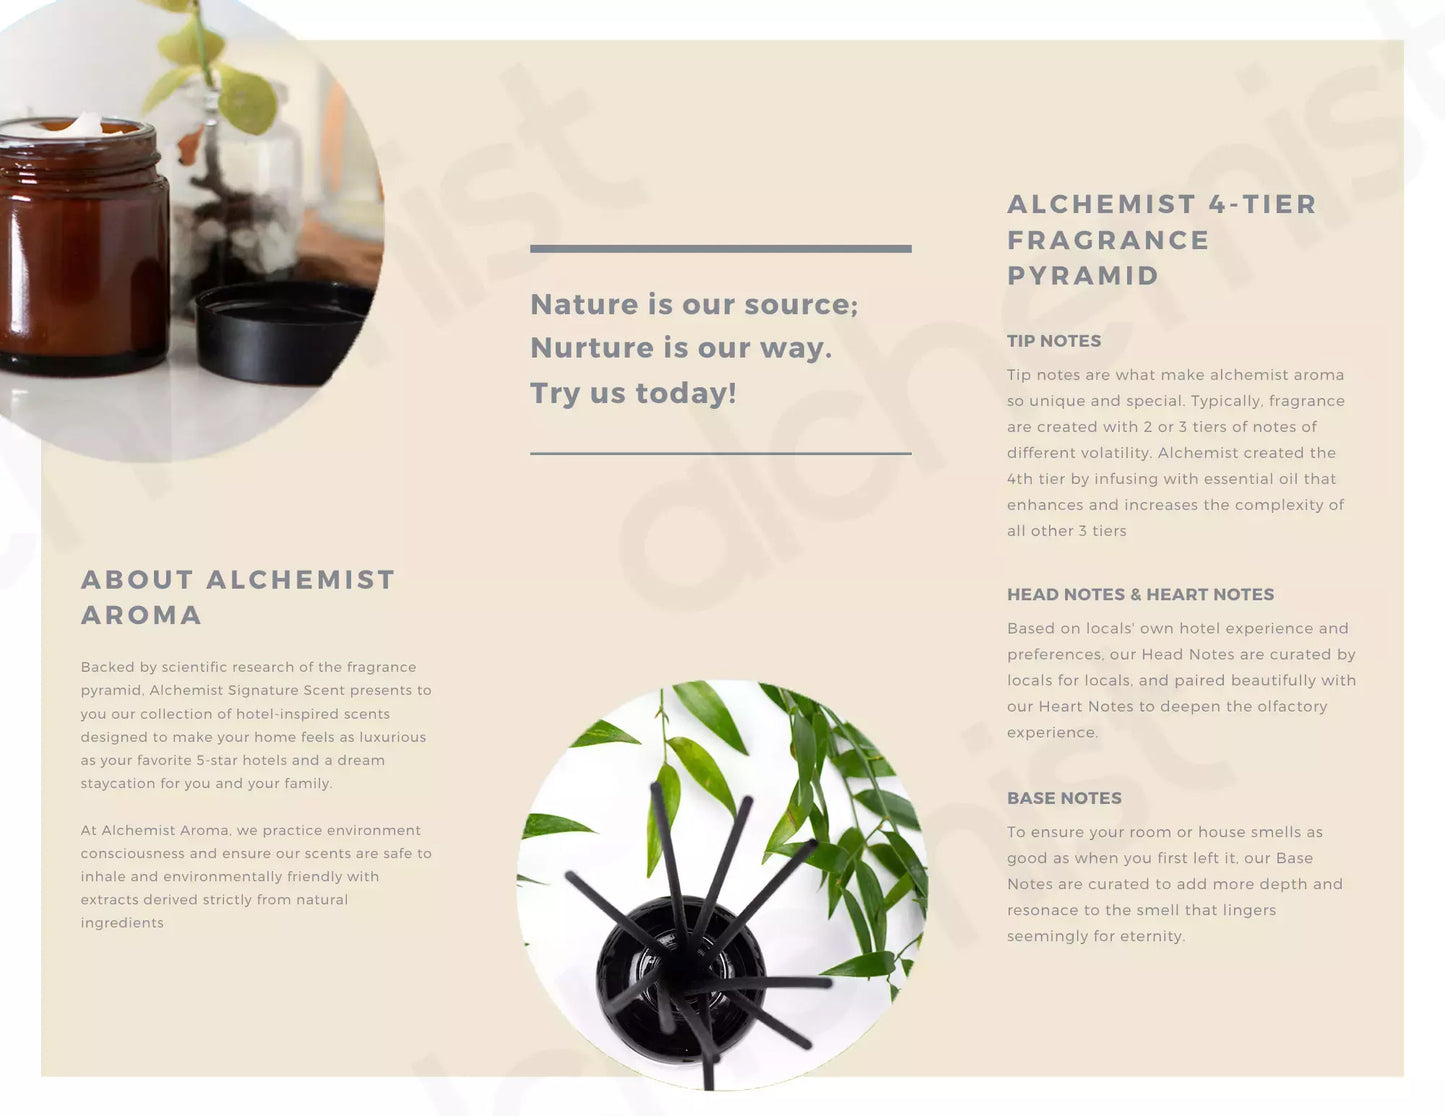 Alchemist Aroma Ritz Carlton Inspired Signature Scent【7】Reed Diffuser - LYCHEE + COPAL WOOD